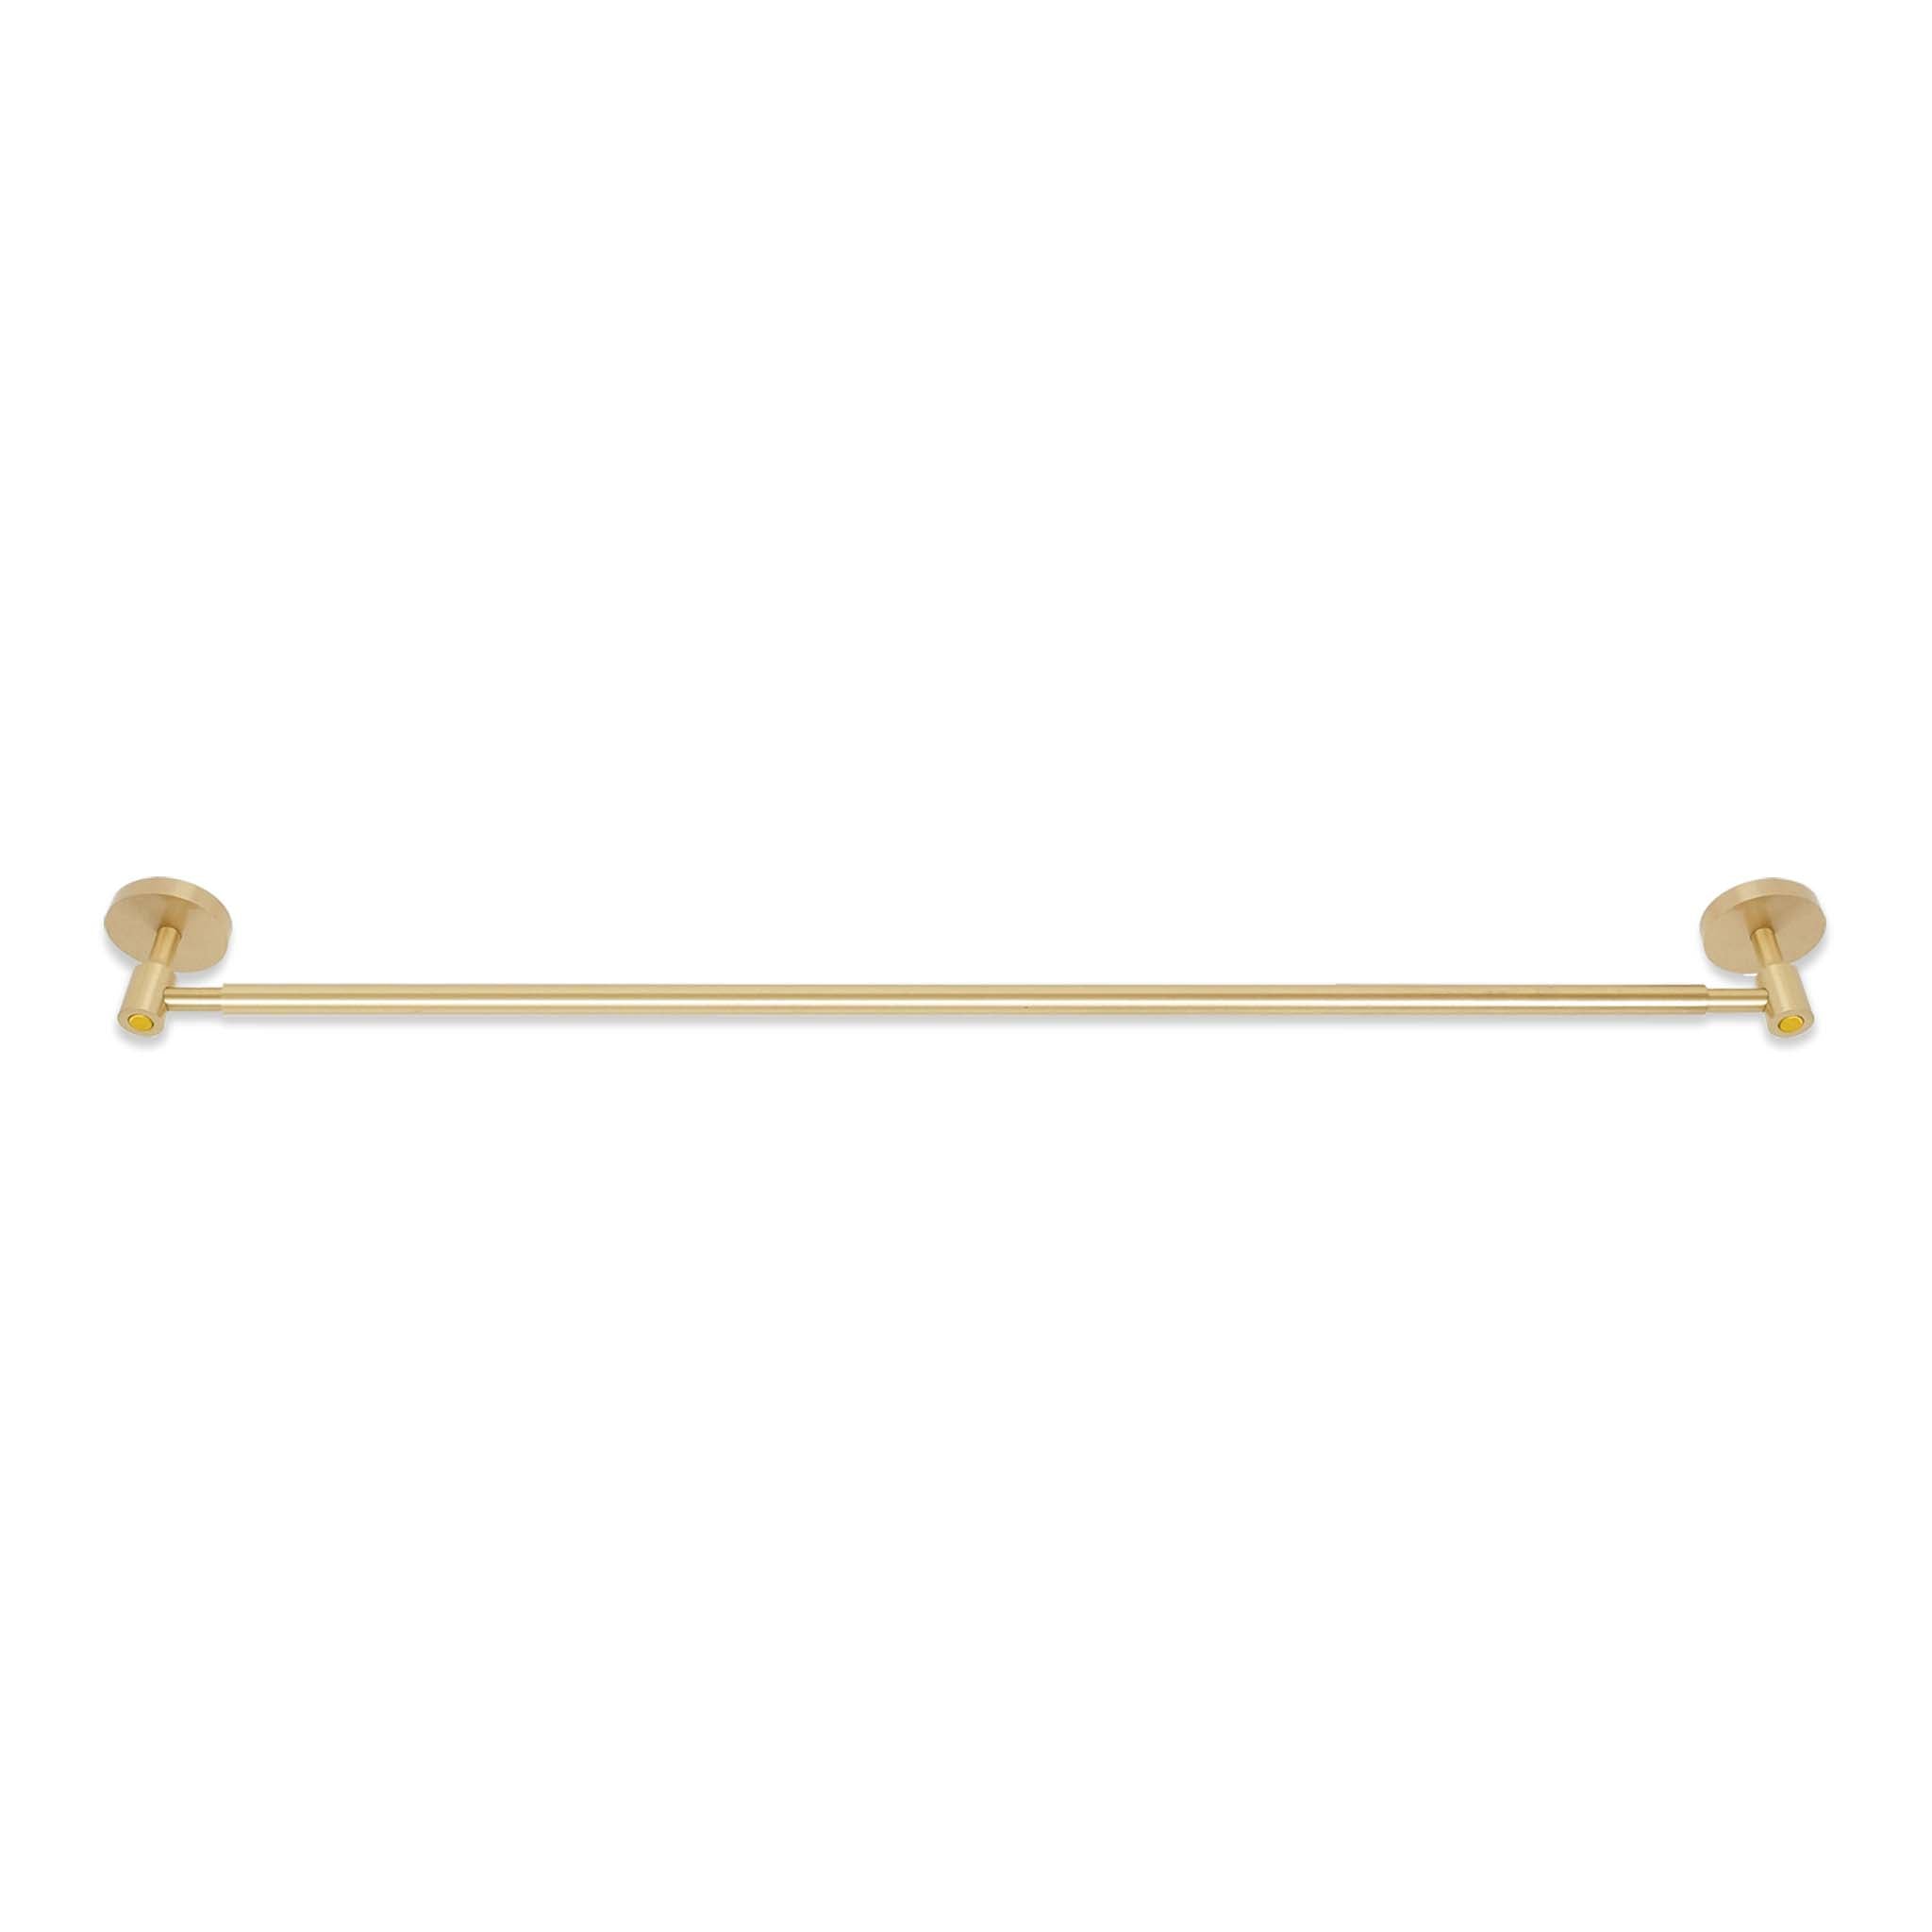 Brass and ochre color Head towel bar 24" Dutton Brown hardware